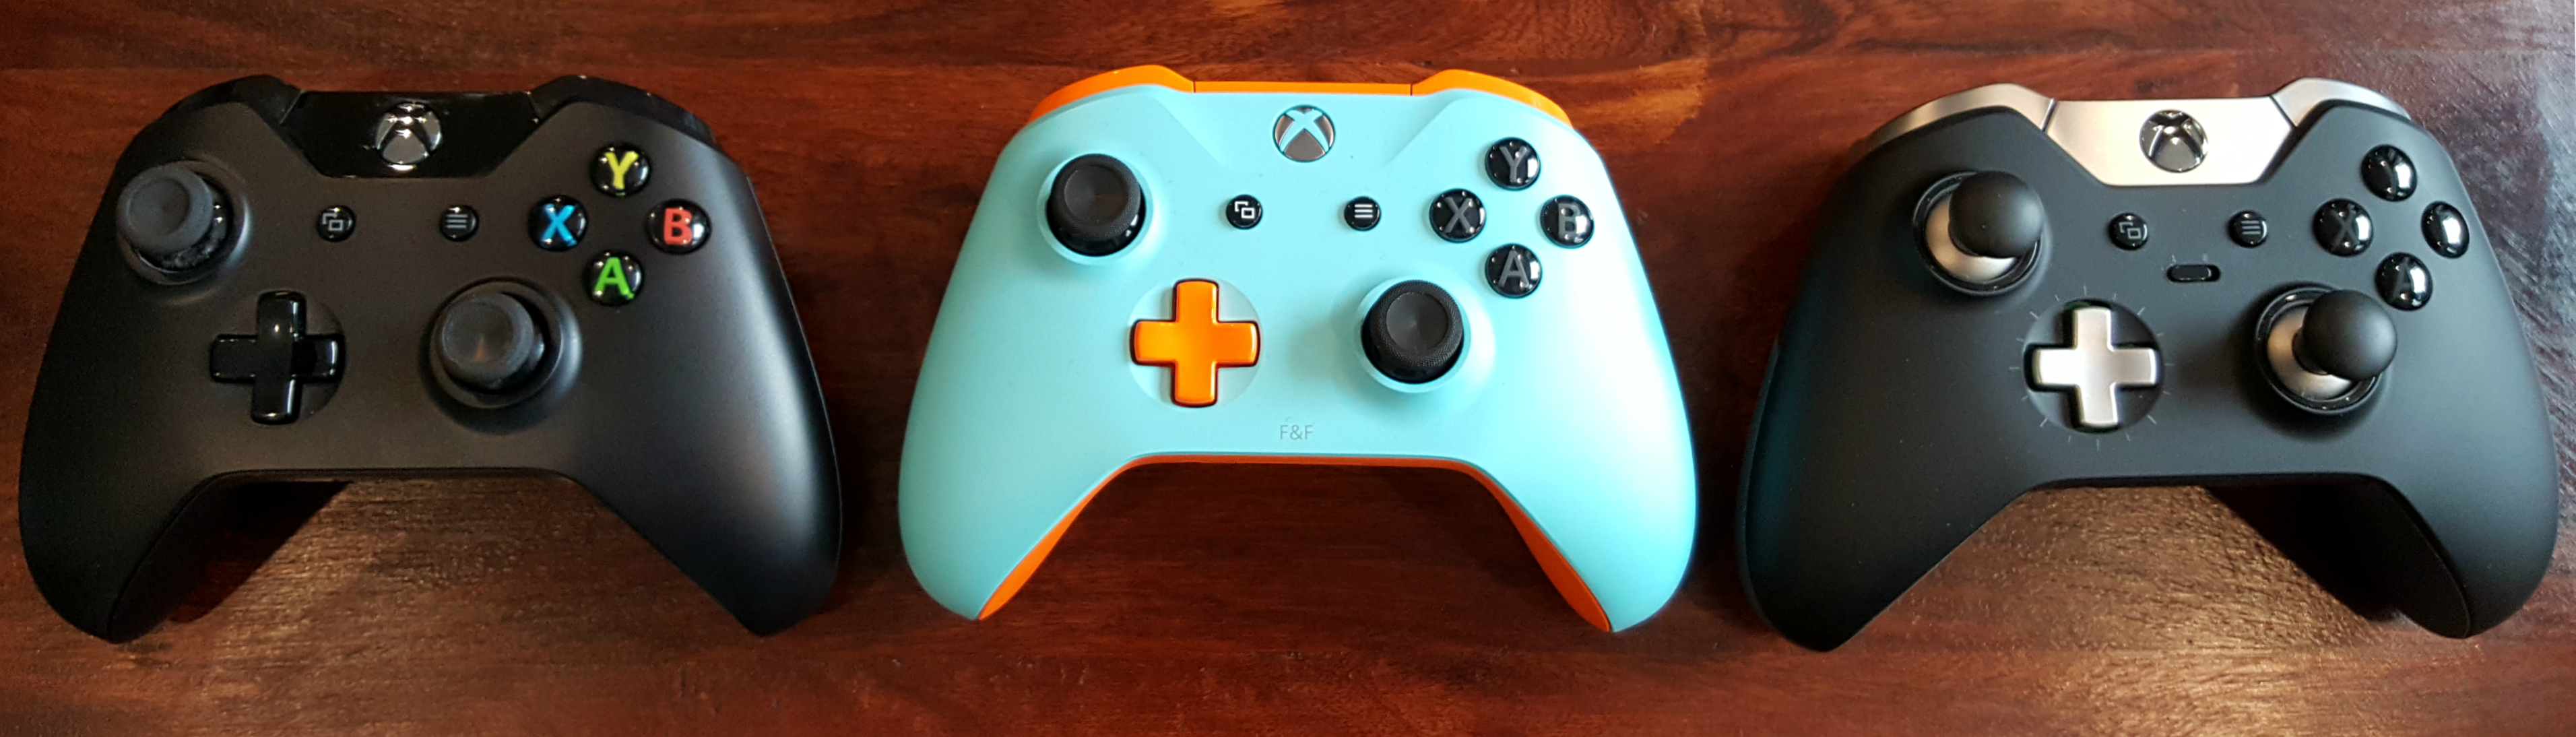 aftermarket xbox one controller